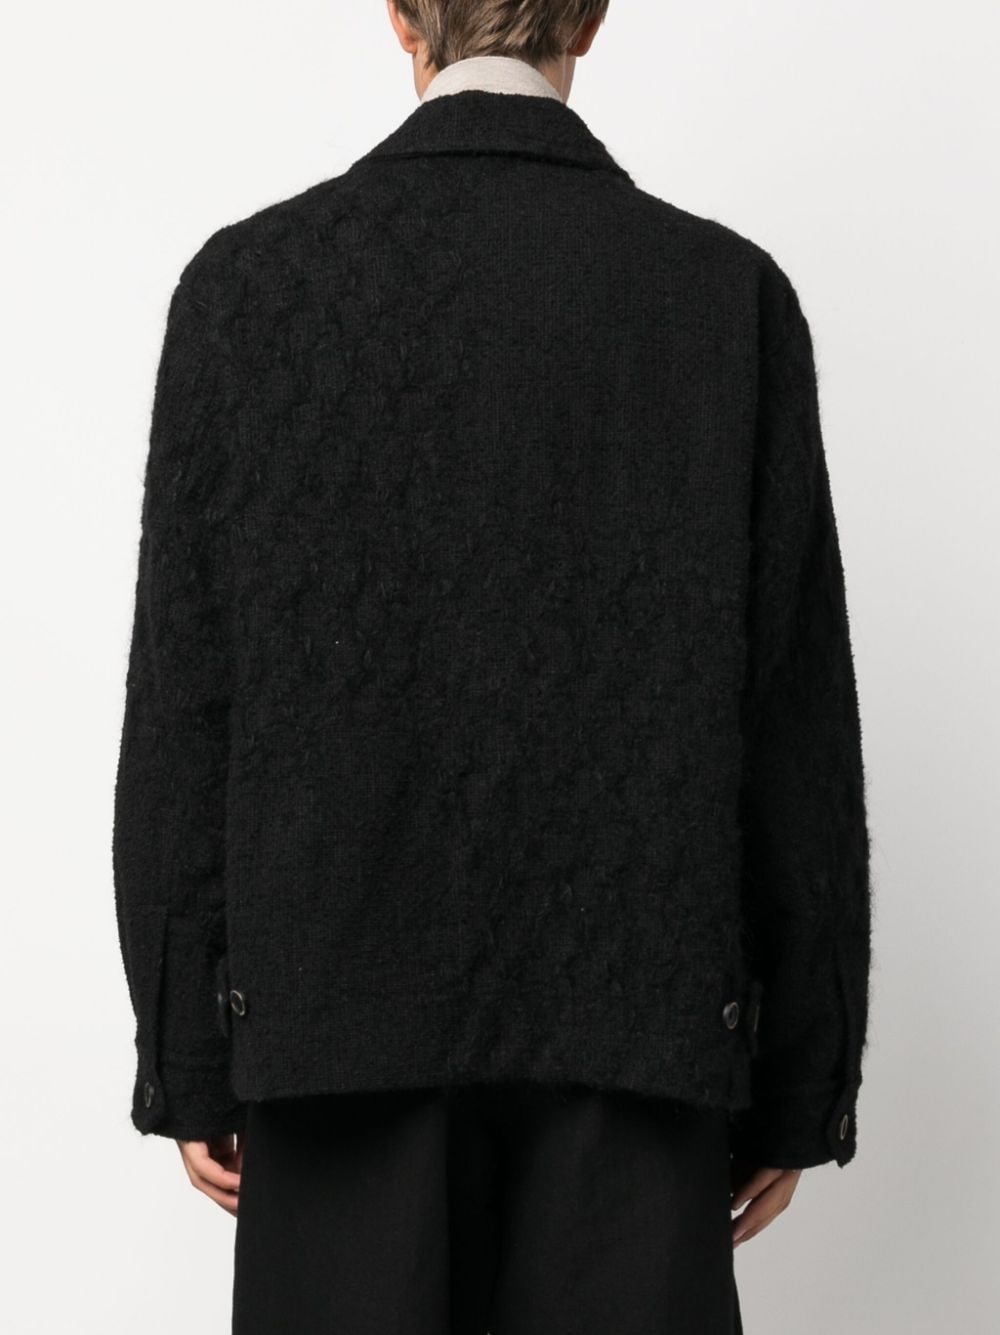 distressed-effect knitted shirt jacket - 4